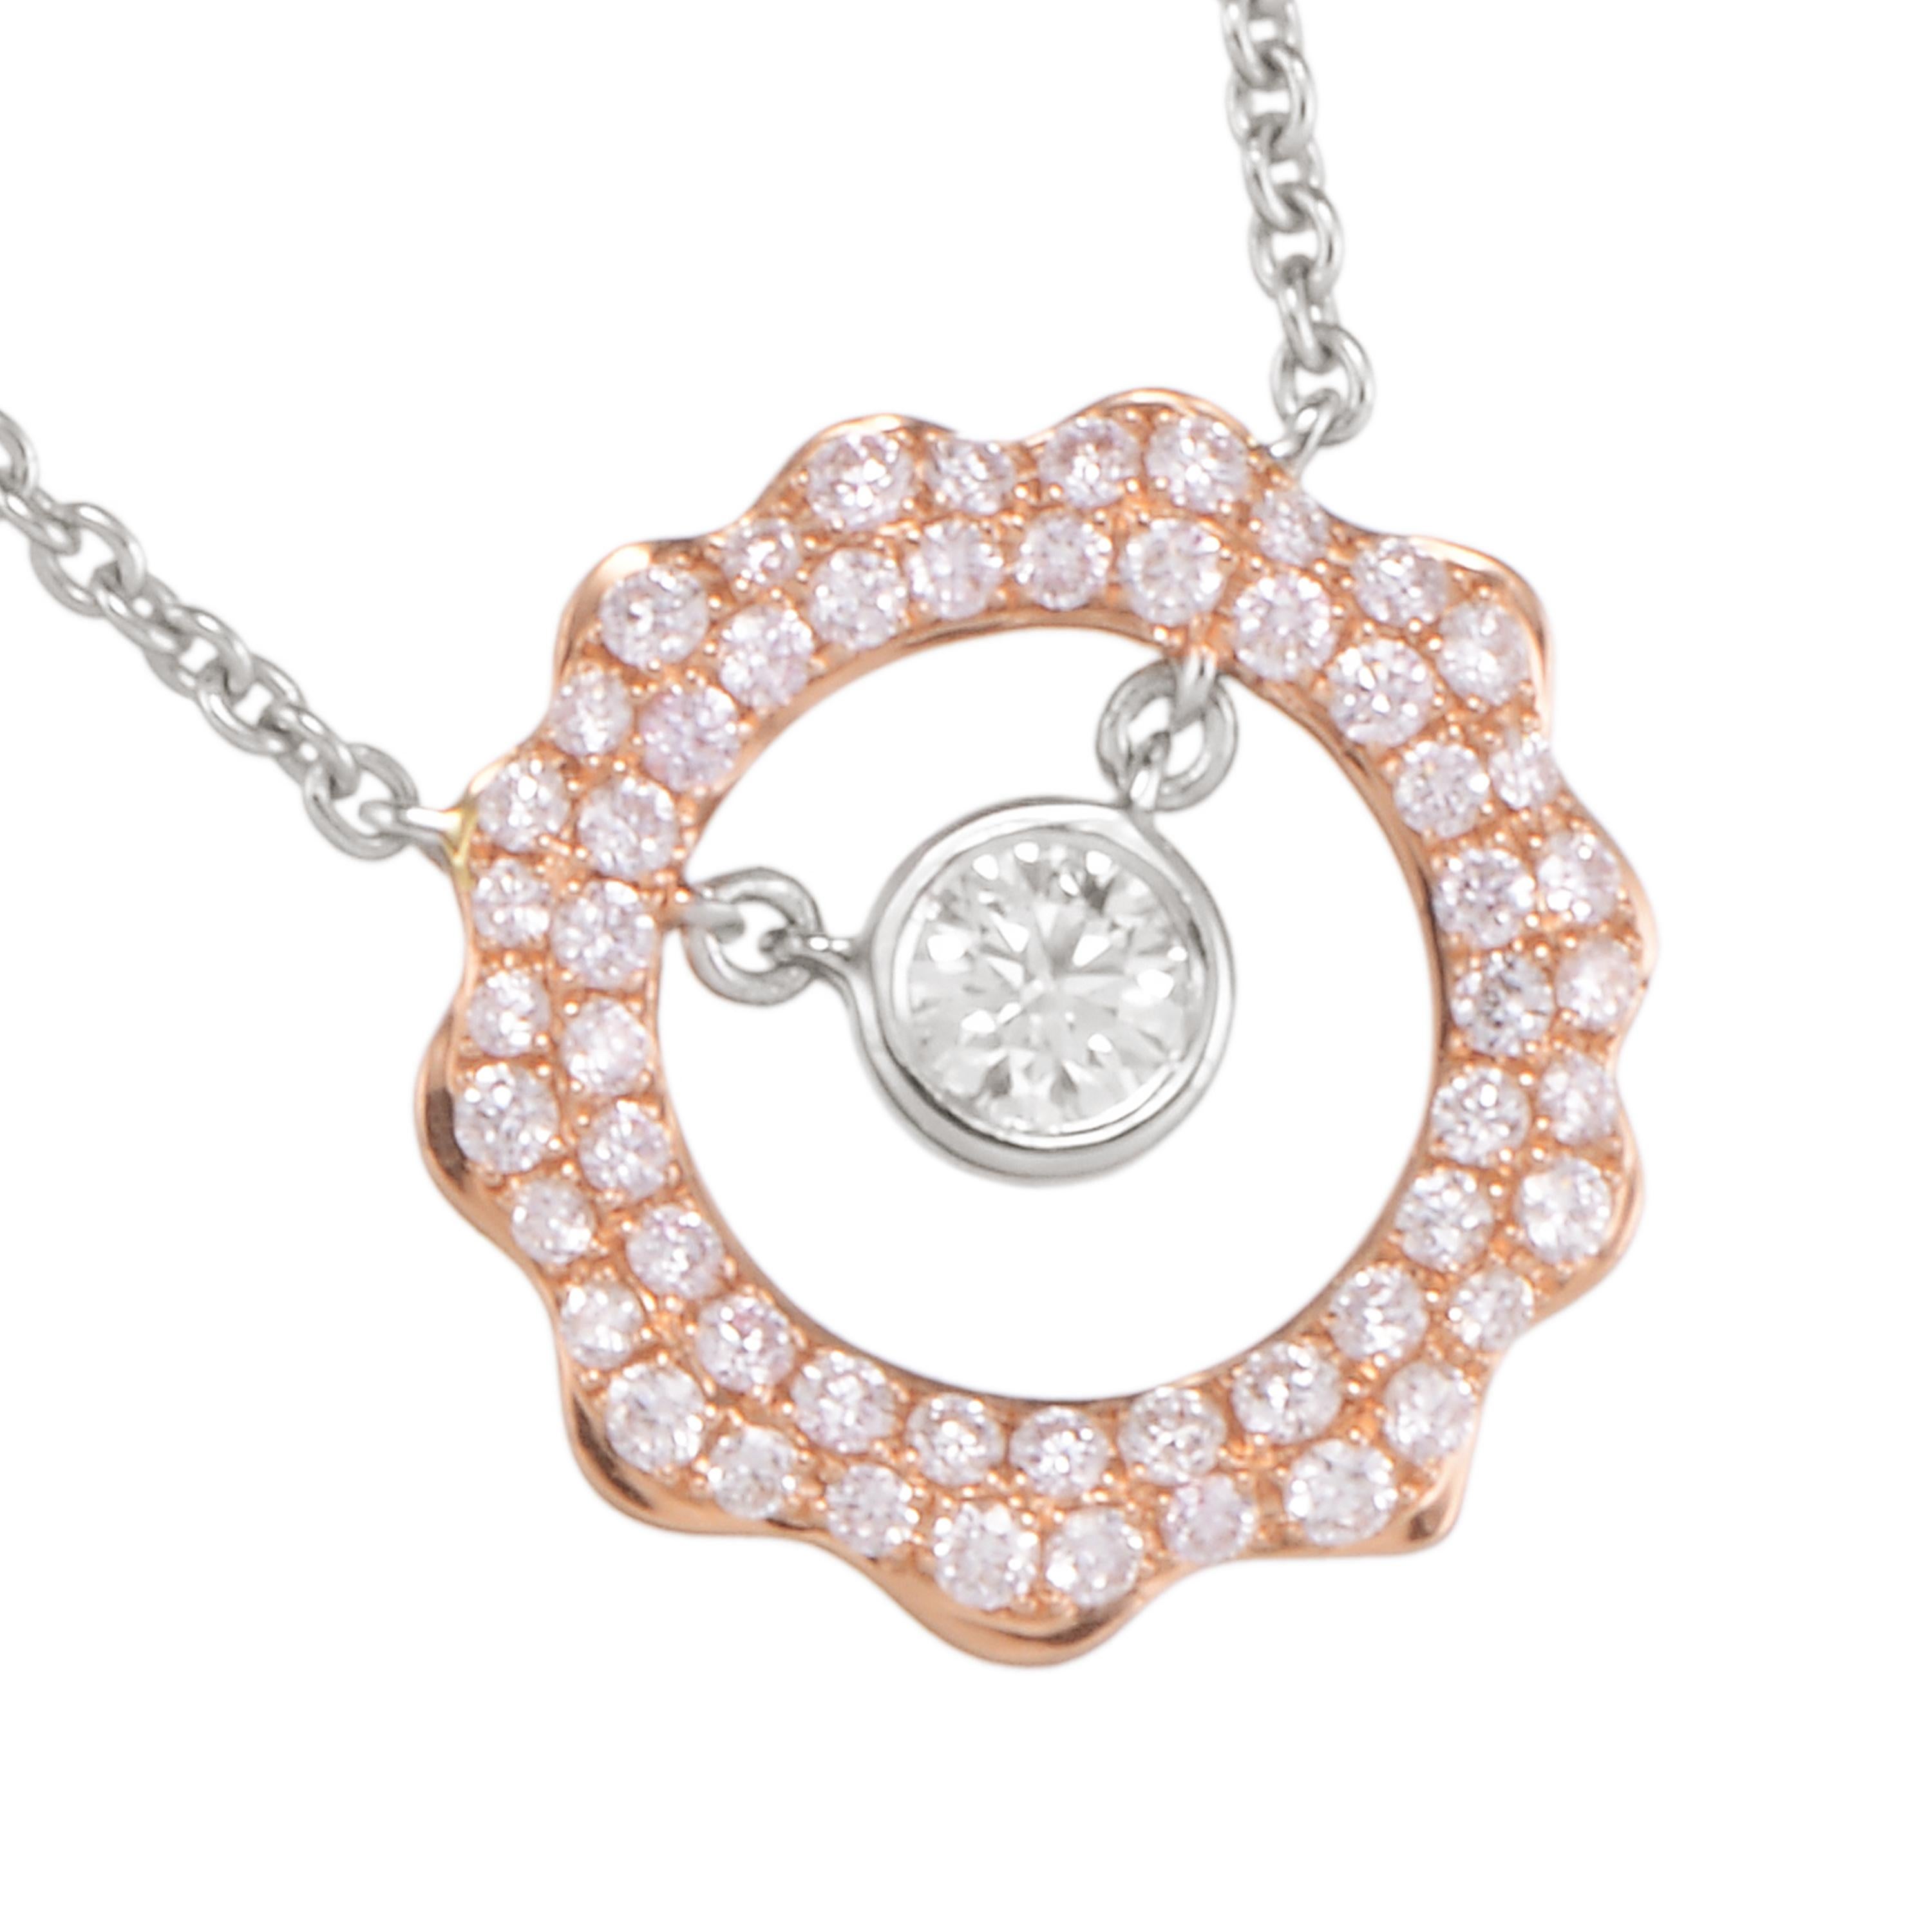 Cast in the shape of the sun, Butani's pendant necklace is handcrafted from 18-karat rose gold and has a 0.28 carat brilliant-cut round diamond center illuminated by 0.74 carats of sparkling pavé diamonds.  Wear it solo or layered with other pieces.